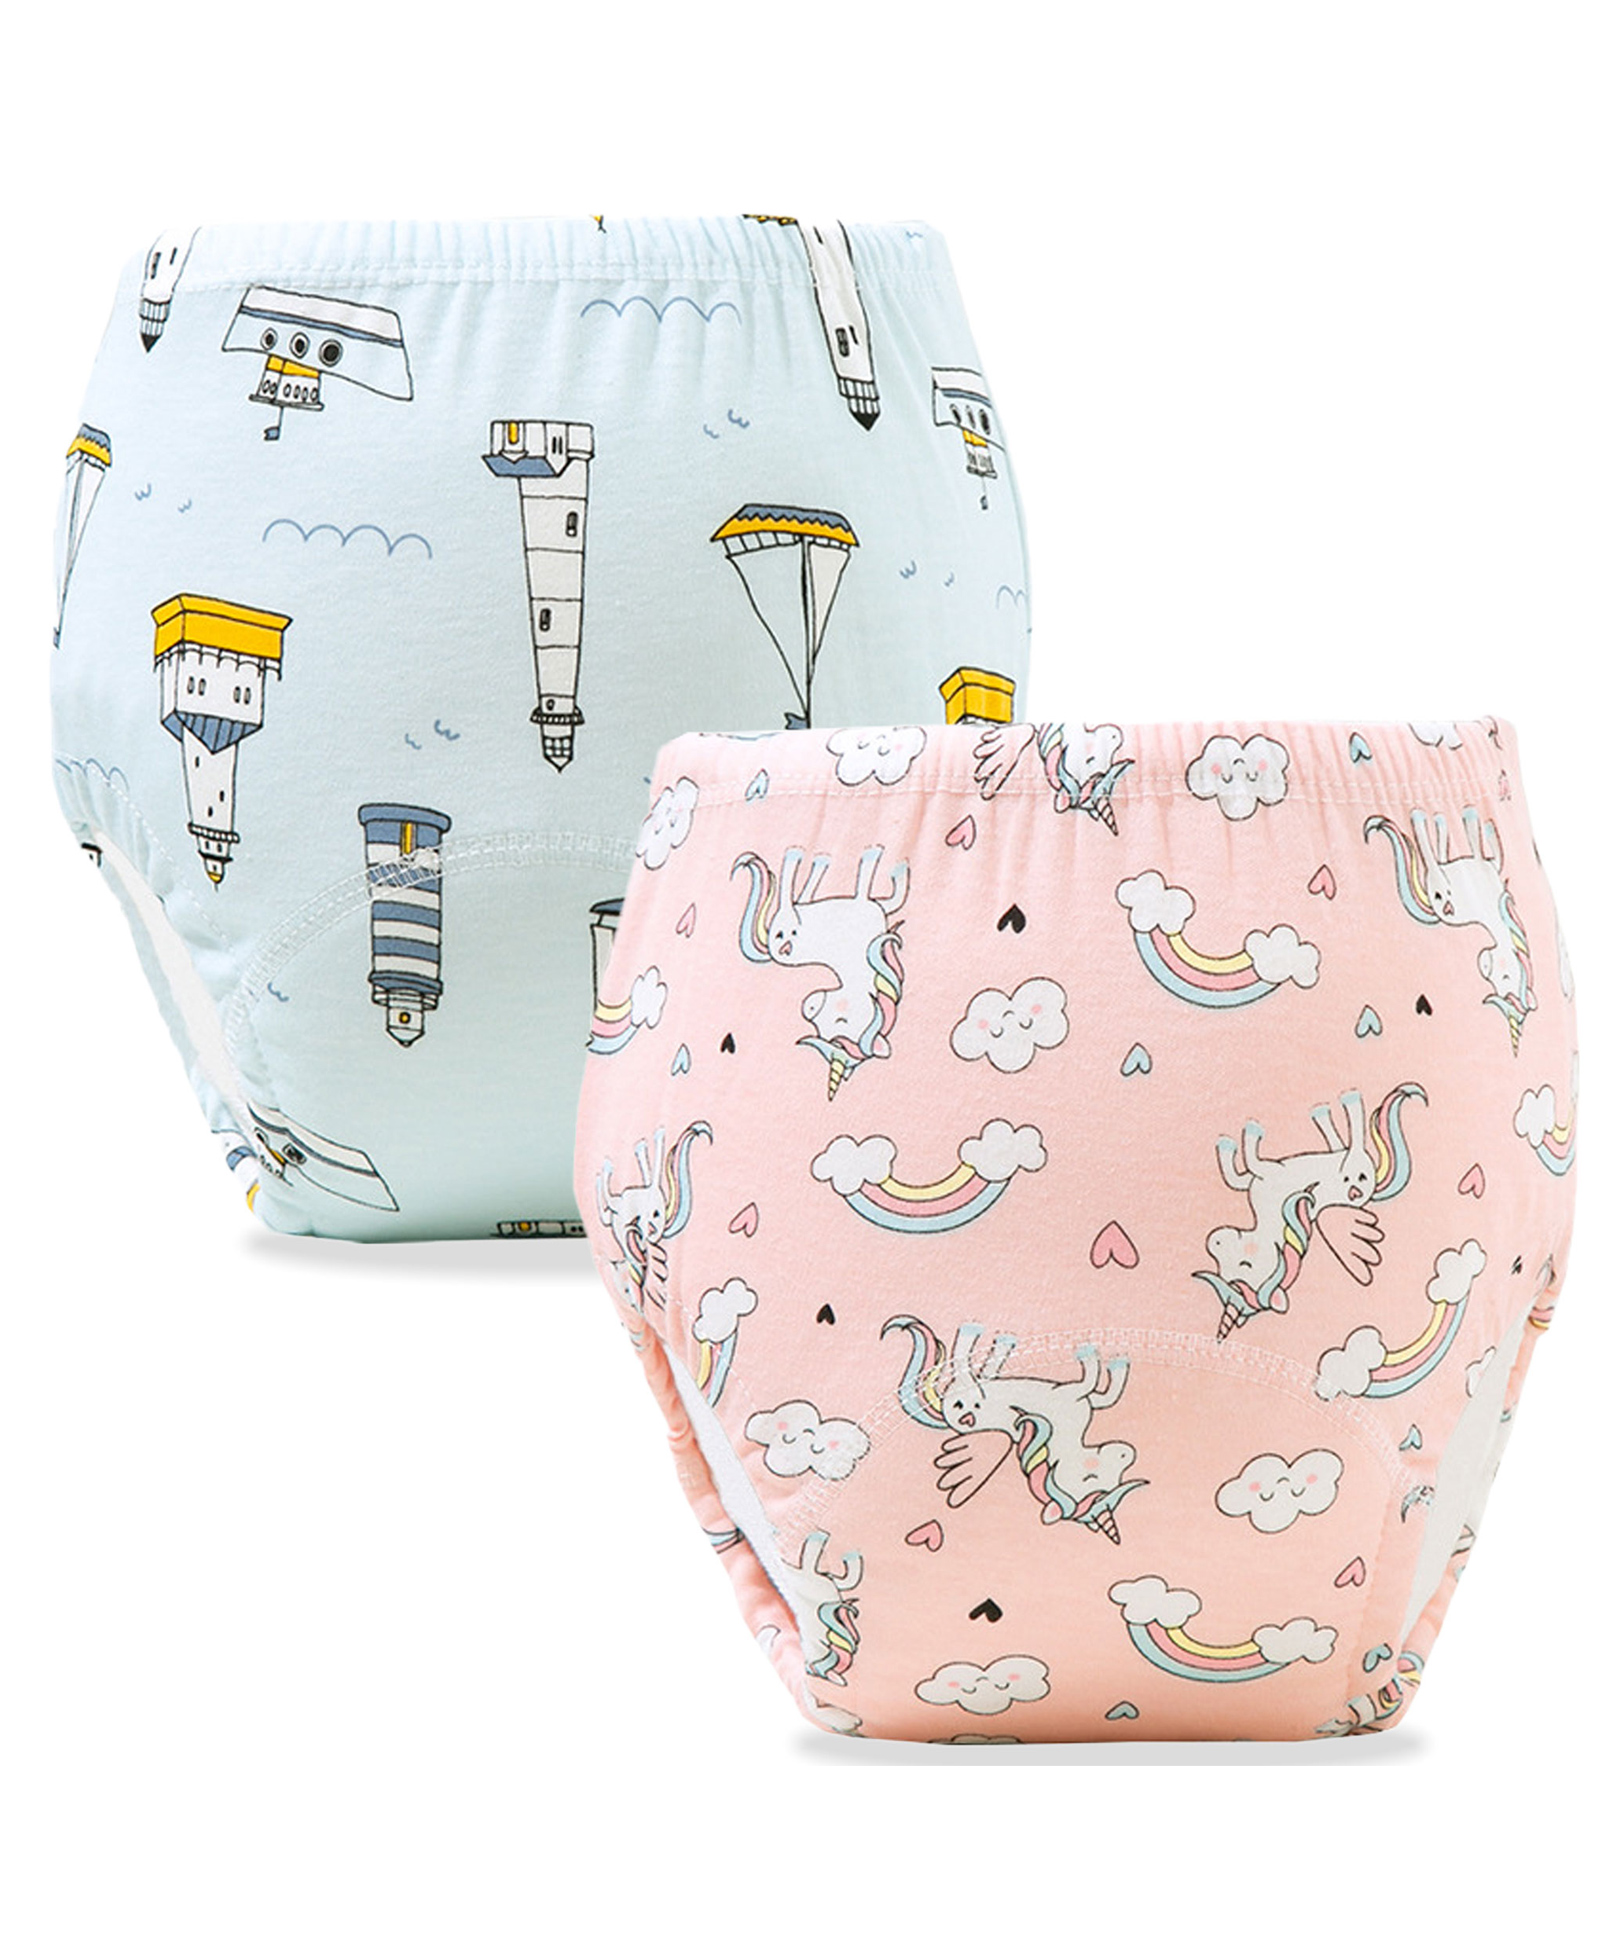 Bembika Babies Cotton Potty Training Pants Printed Design Pack 2 M Size   Multicolor Online in India Buy at Best Price from FirstCrycom  12718592